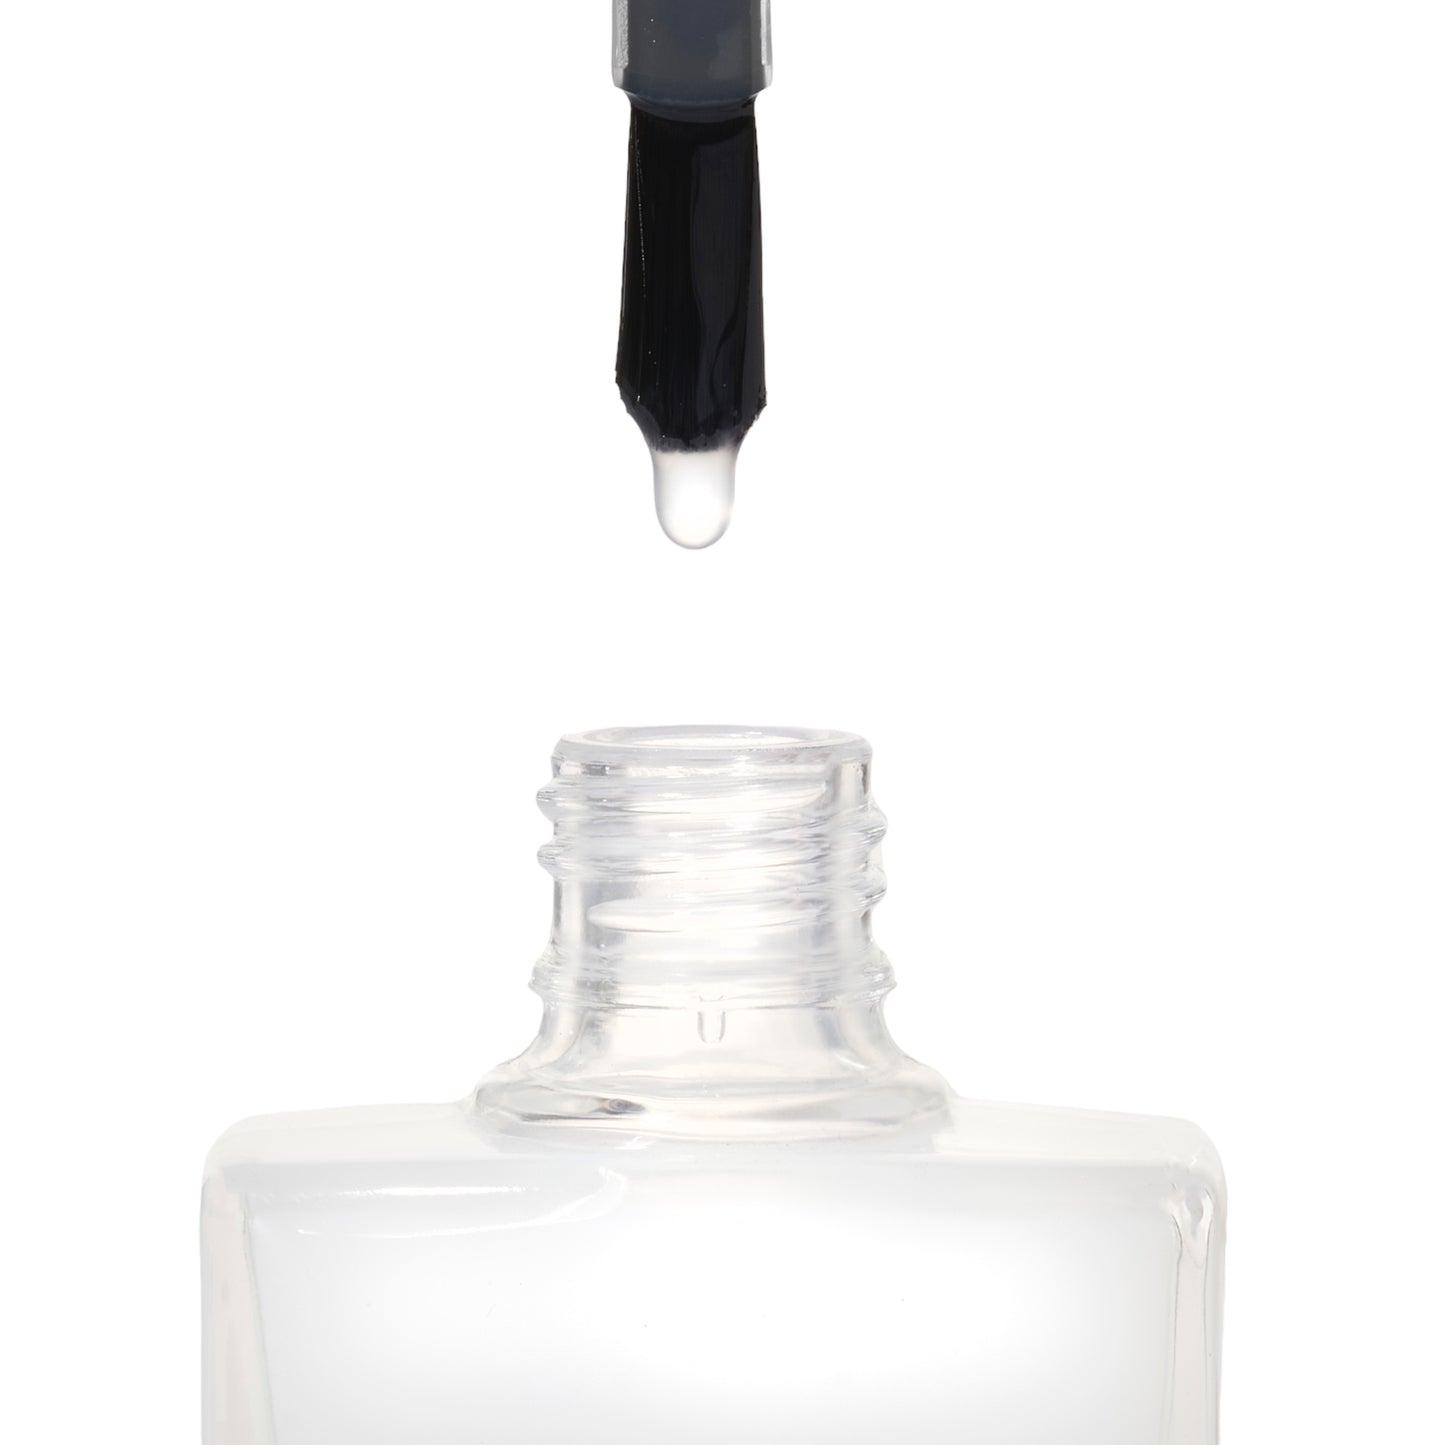 A bottle of High Gloss Top Coat, a clear shade from True Nail Polish that provides a glossy finish 